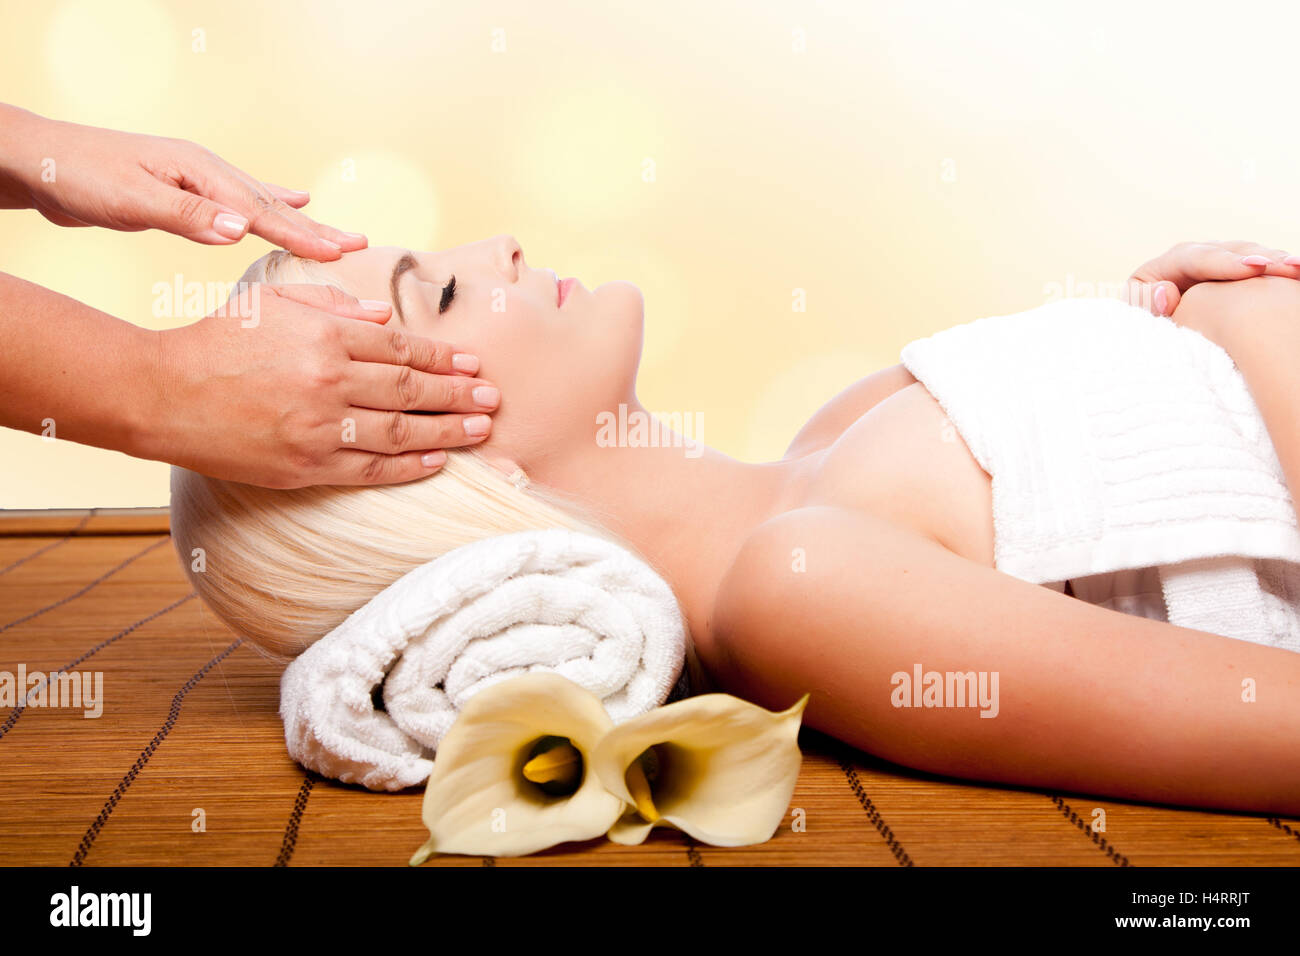 Beautiful young woman relaxing at spa getting therapeutic pampering forehead massage. Stock Photo